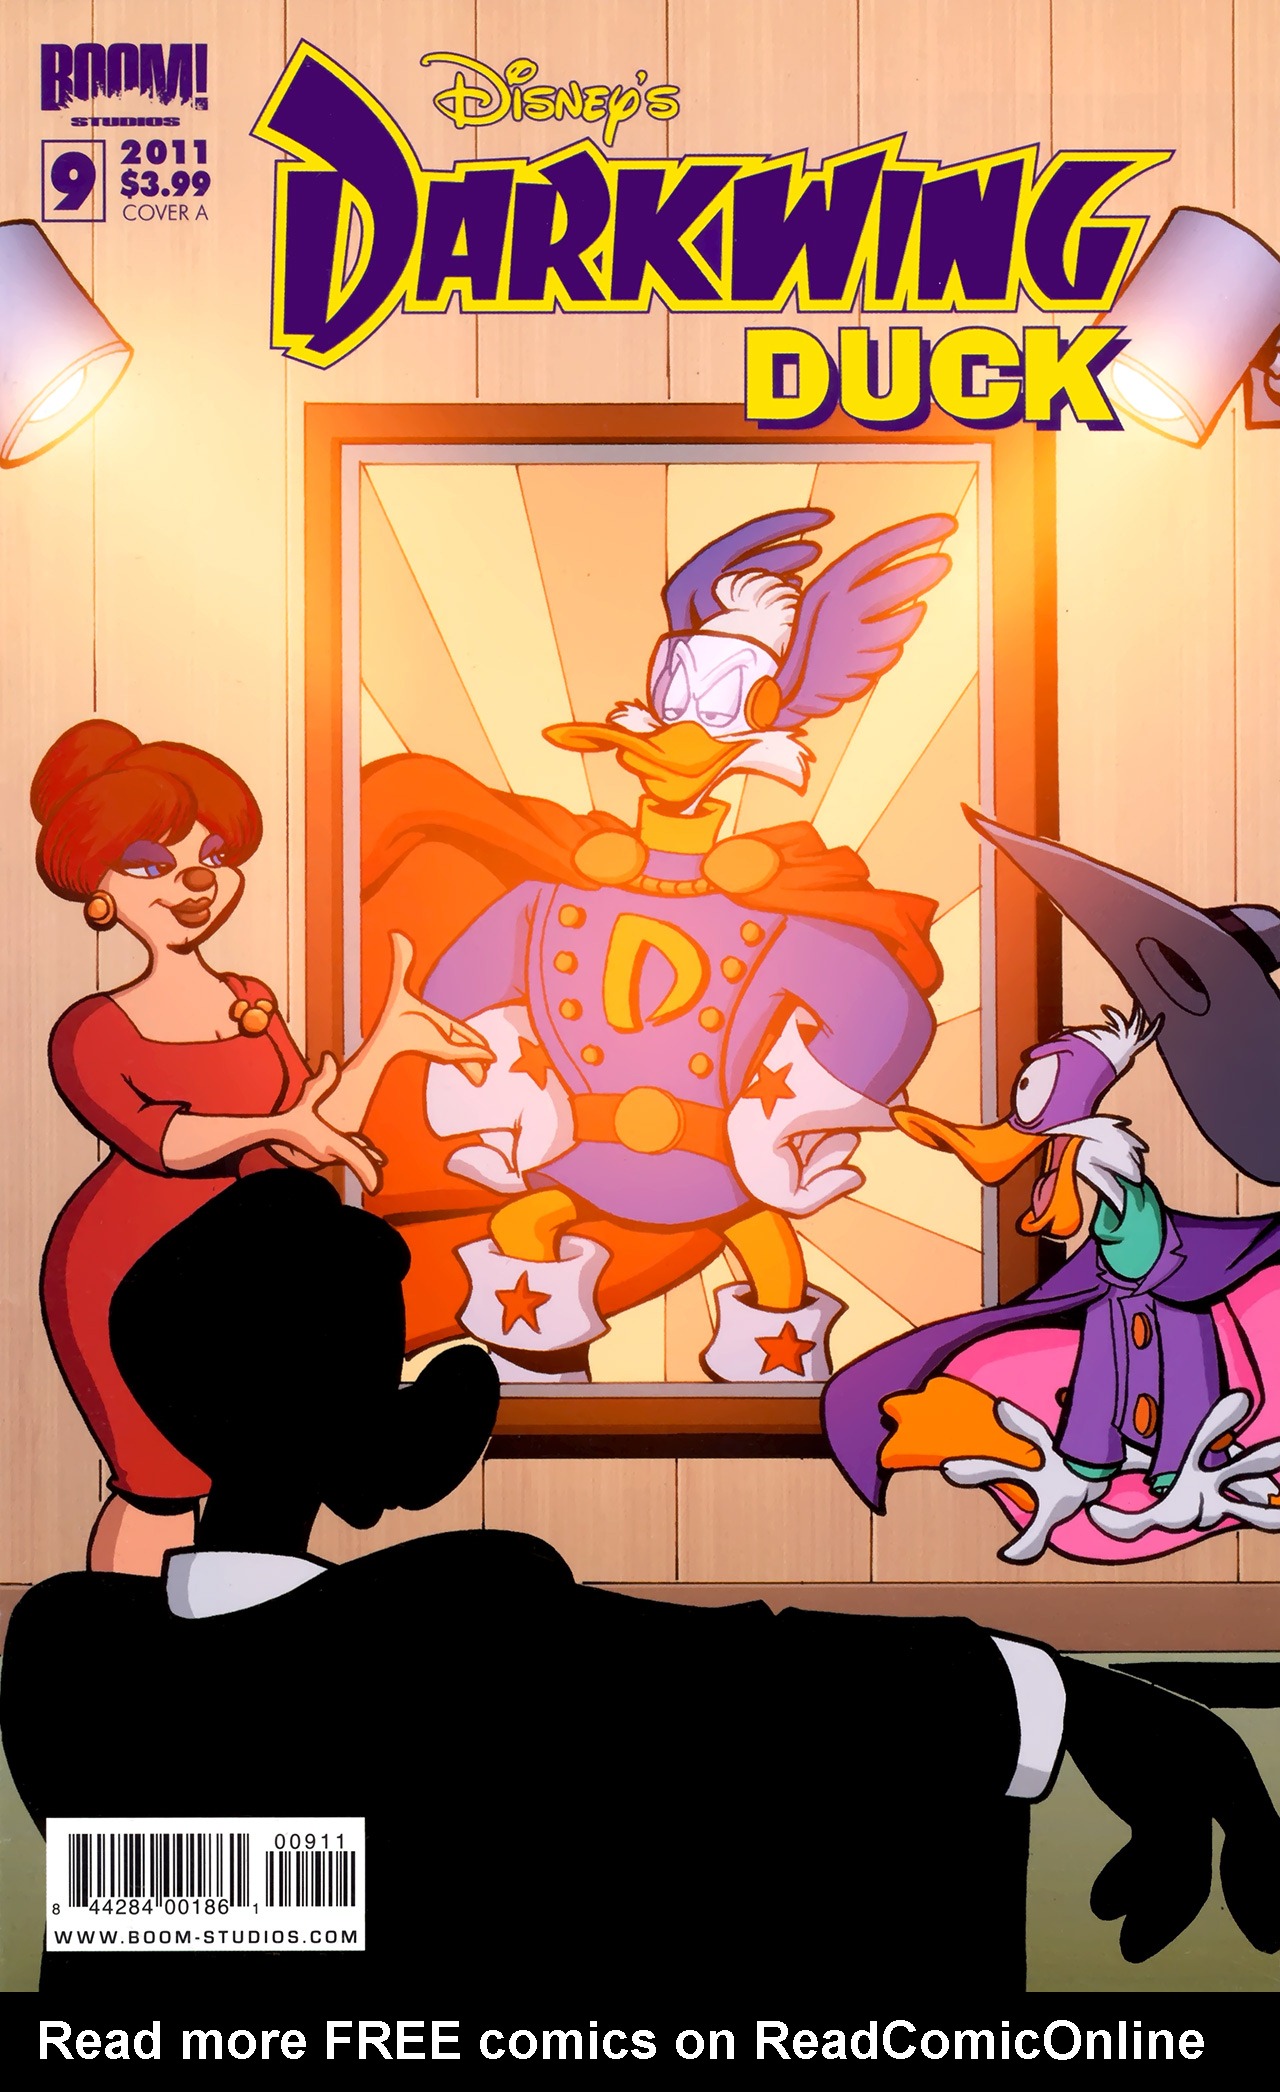 Darkwing Duck 009 Read All Comics Online For Free